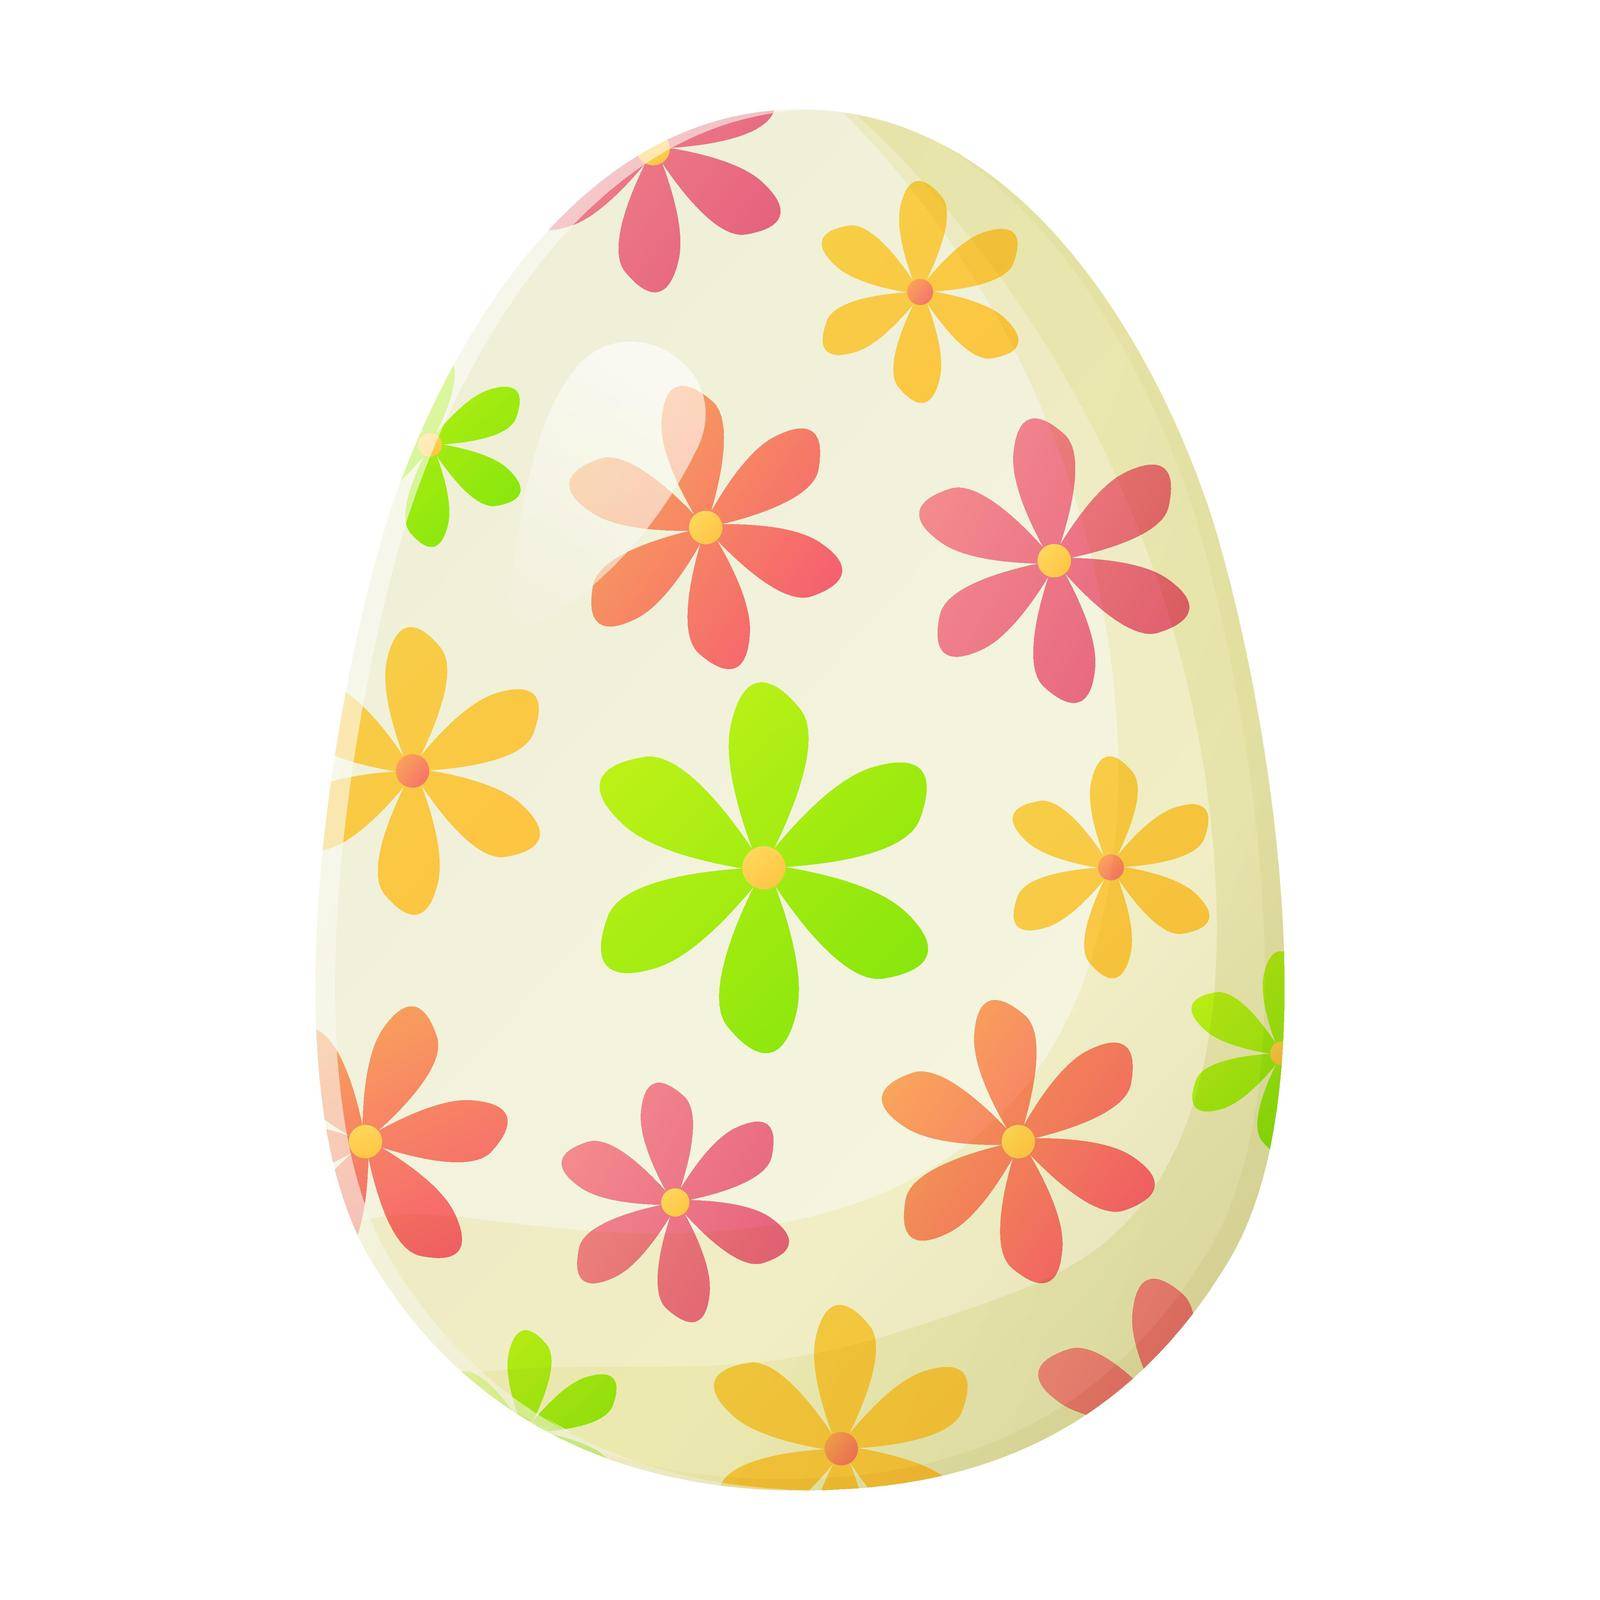 Cute realistic Easter egg painted with with flowers pattern. Can be used as easter hunt element for web banners, posters and web pages. Stock vector illustration in cartoon style isolated on white background.